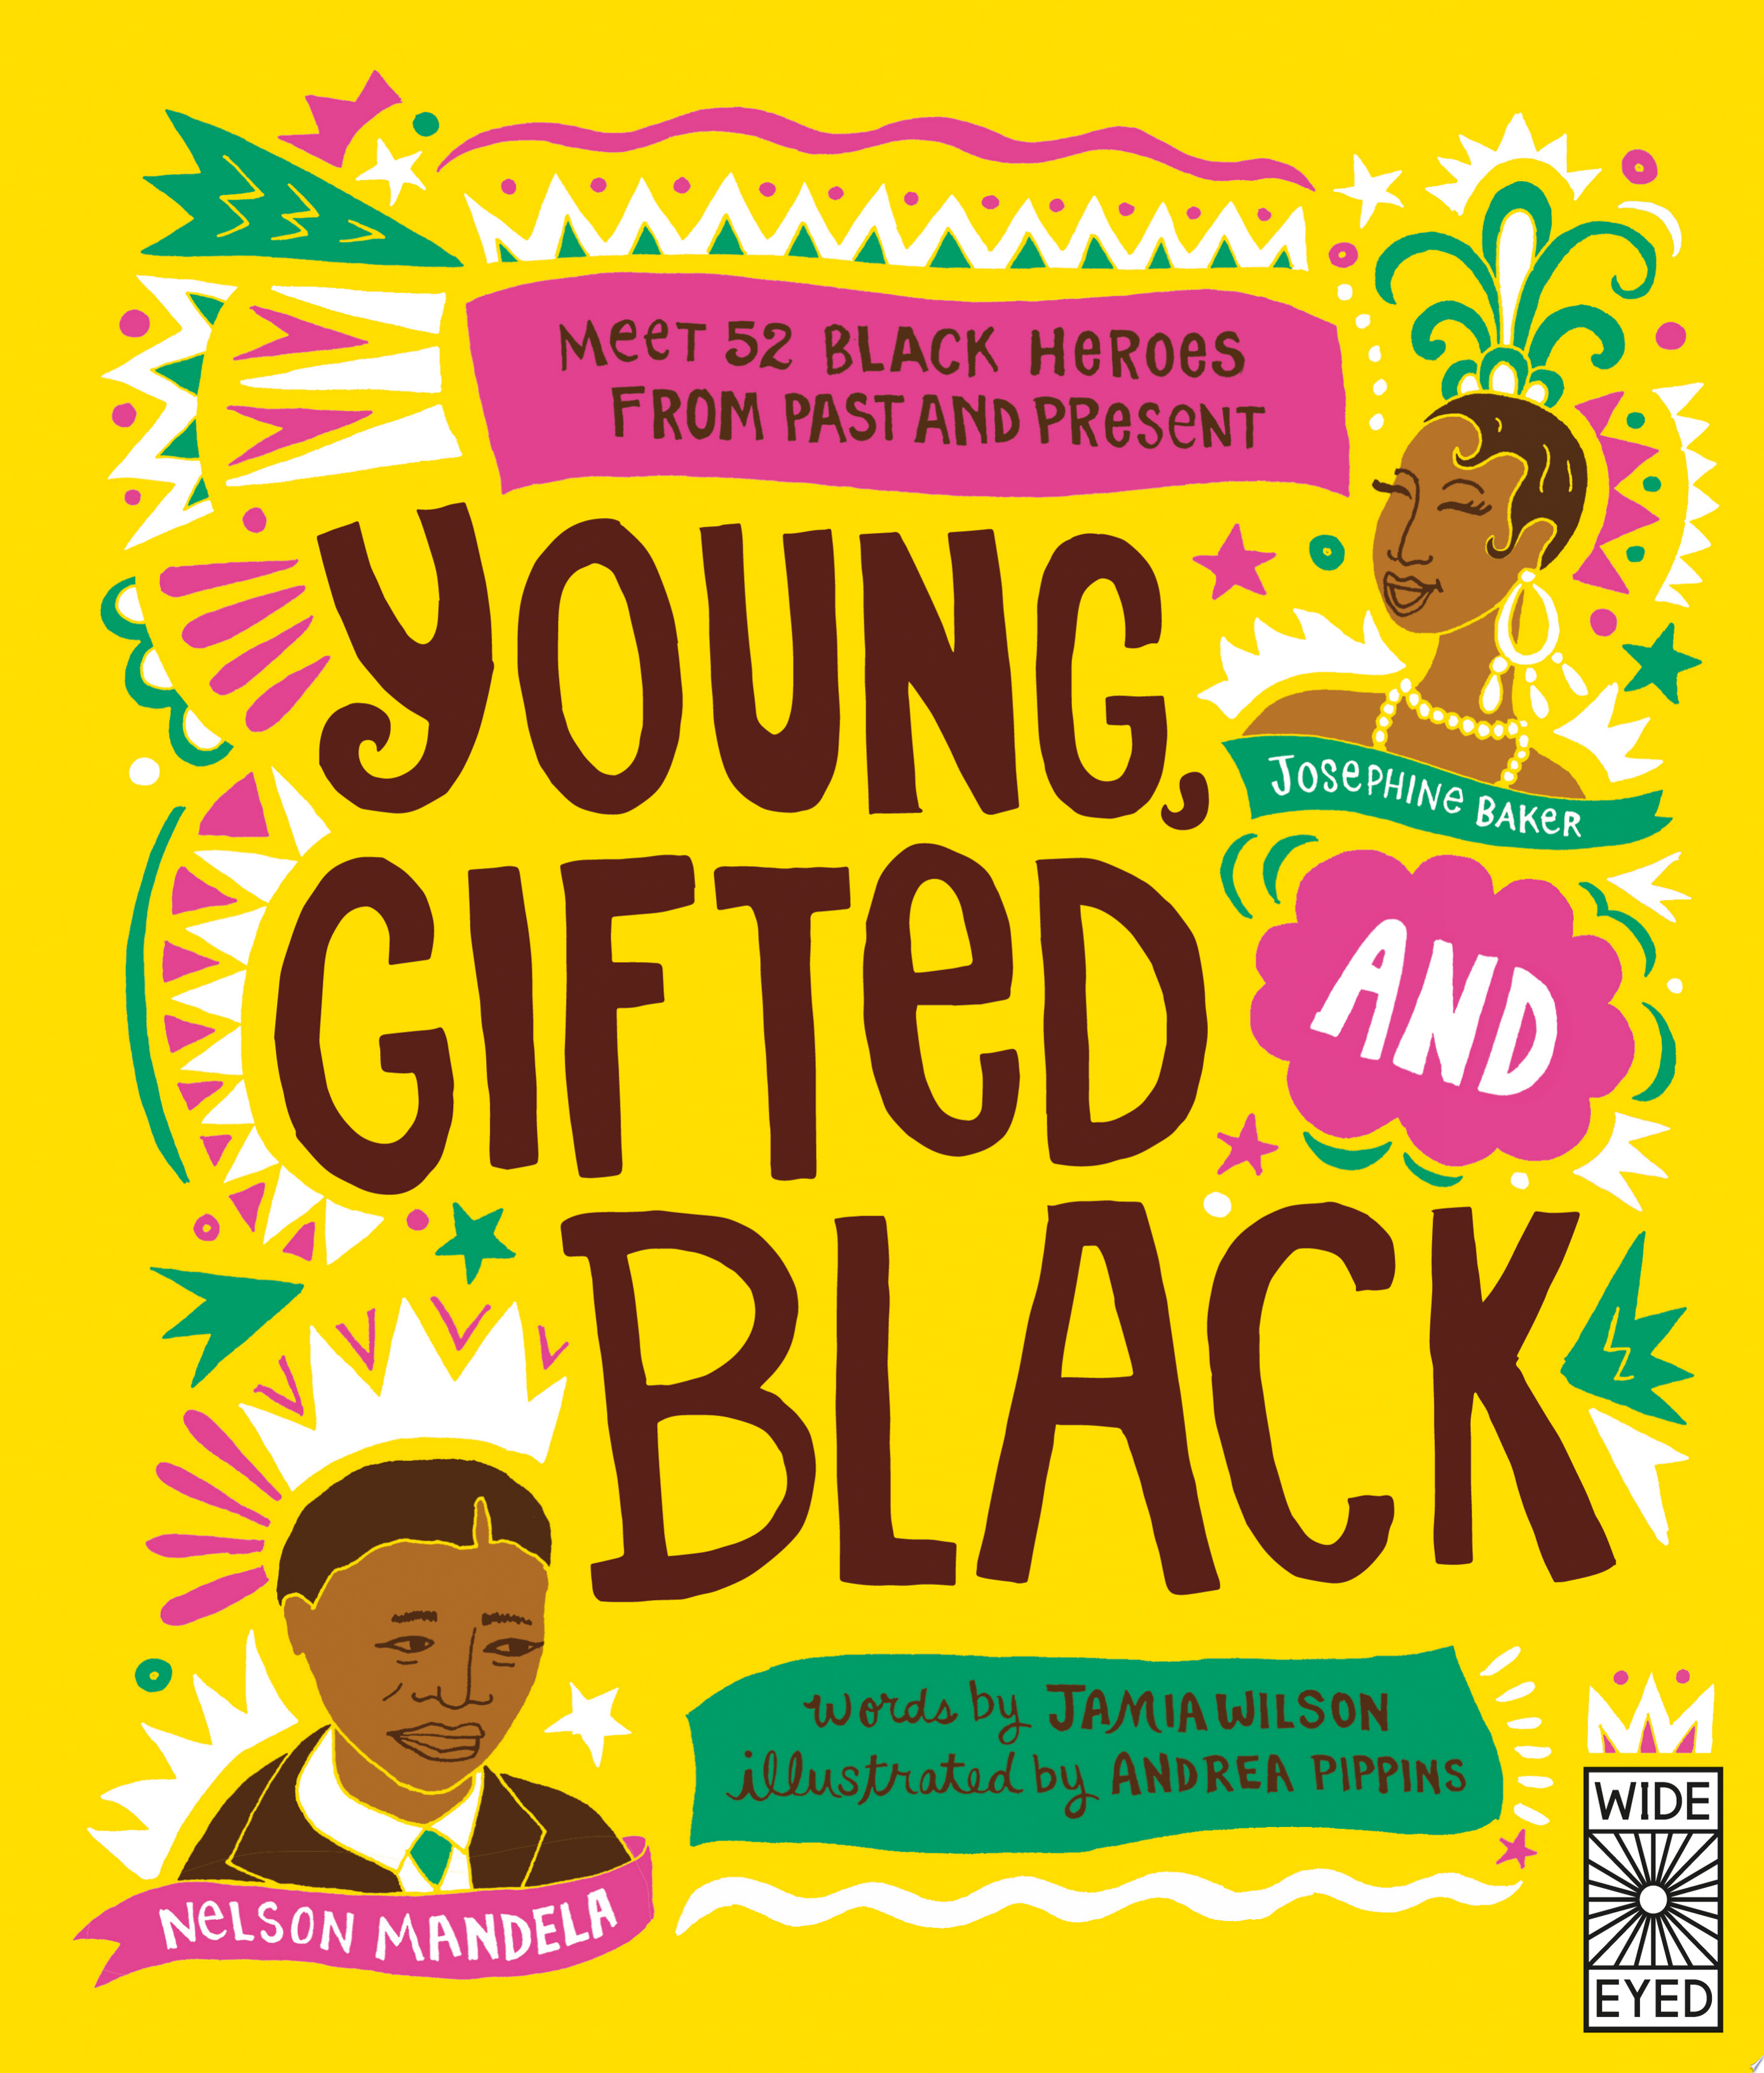 Image for "Young Gifted and Black"